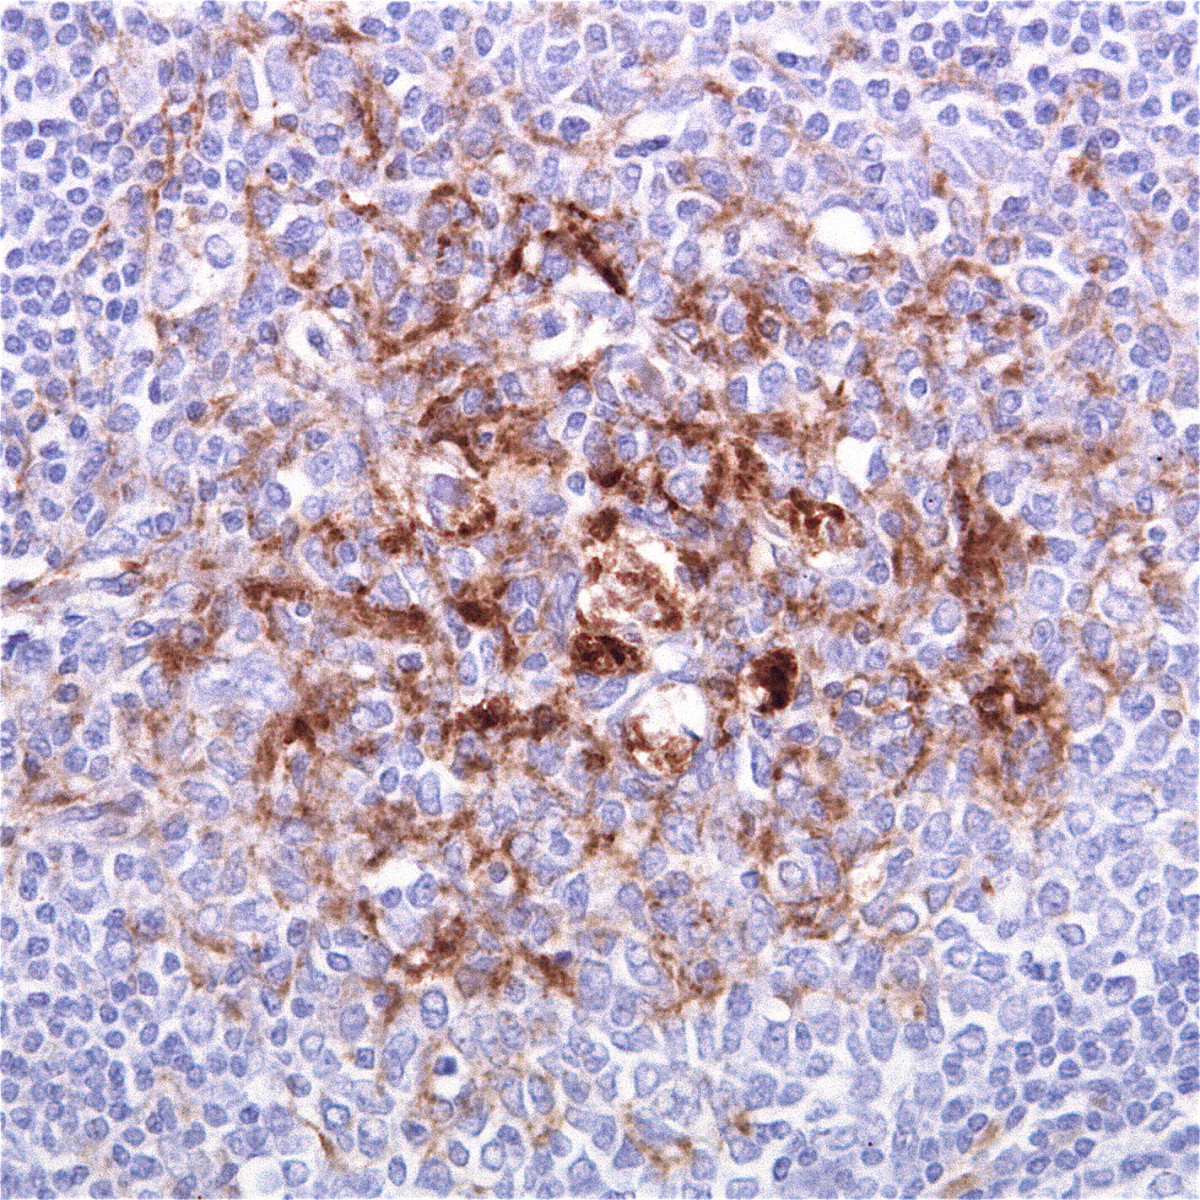 Stained clumps of prions in tonsil tissue from a vCJD patient